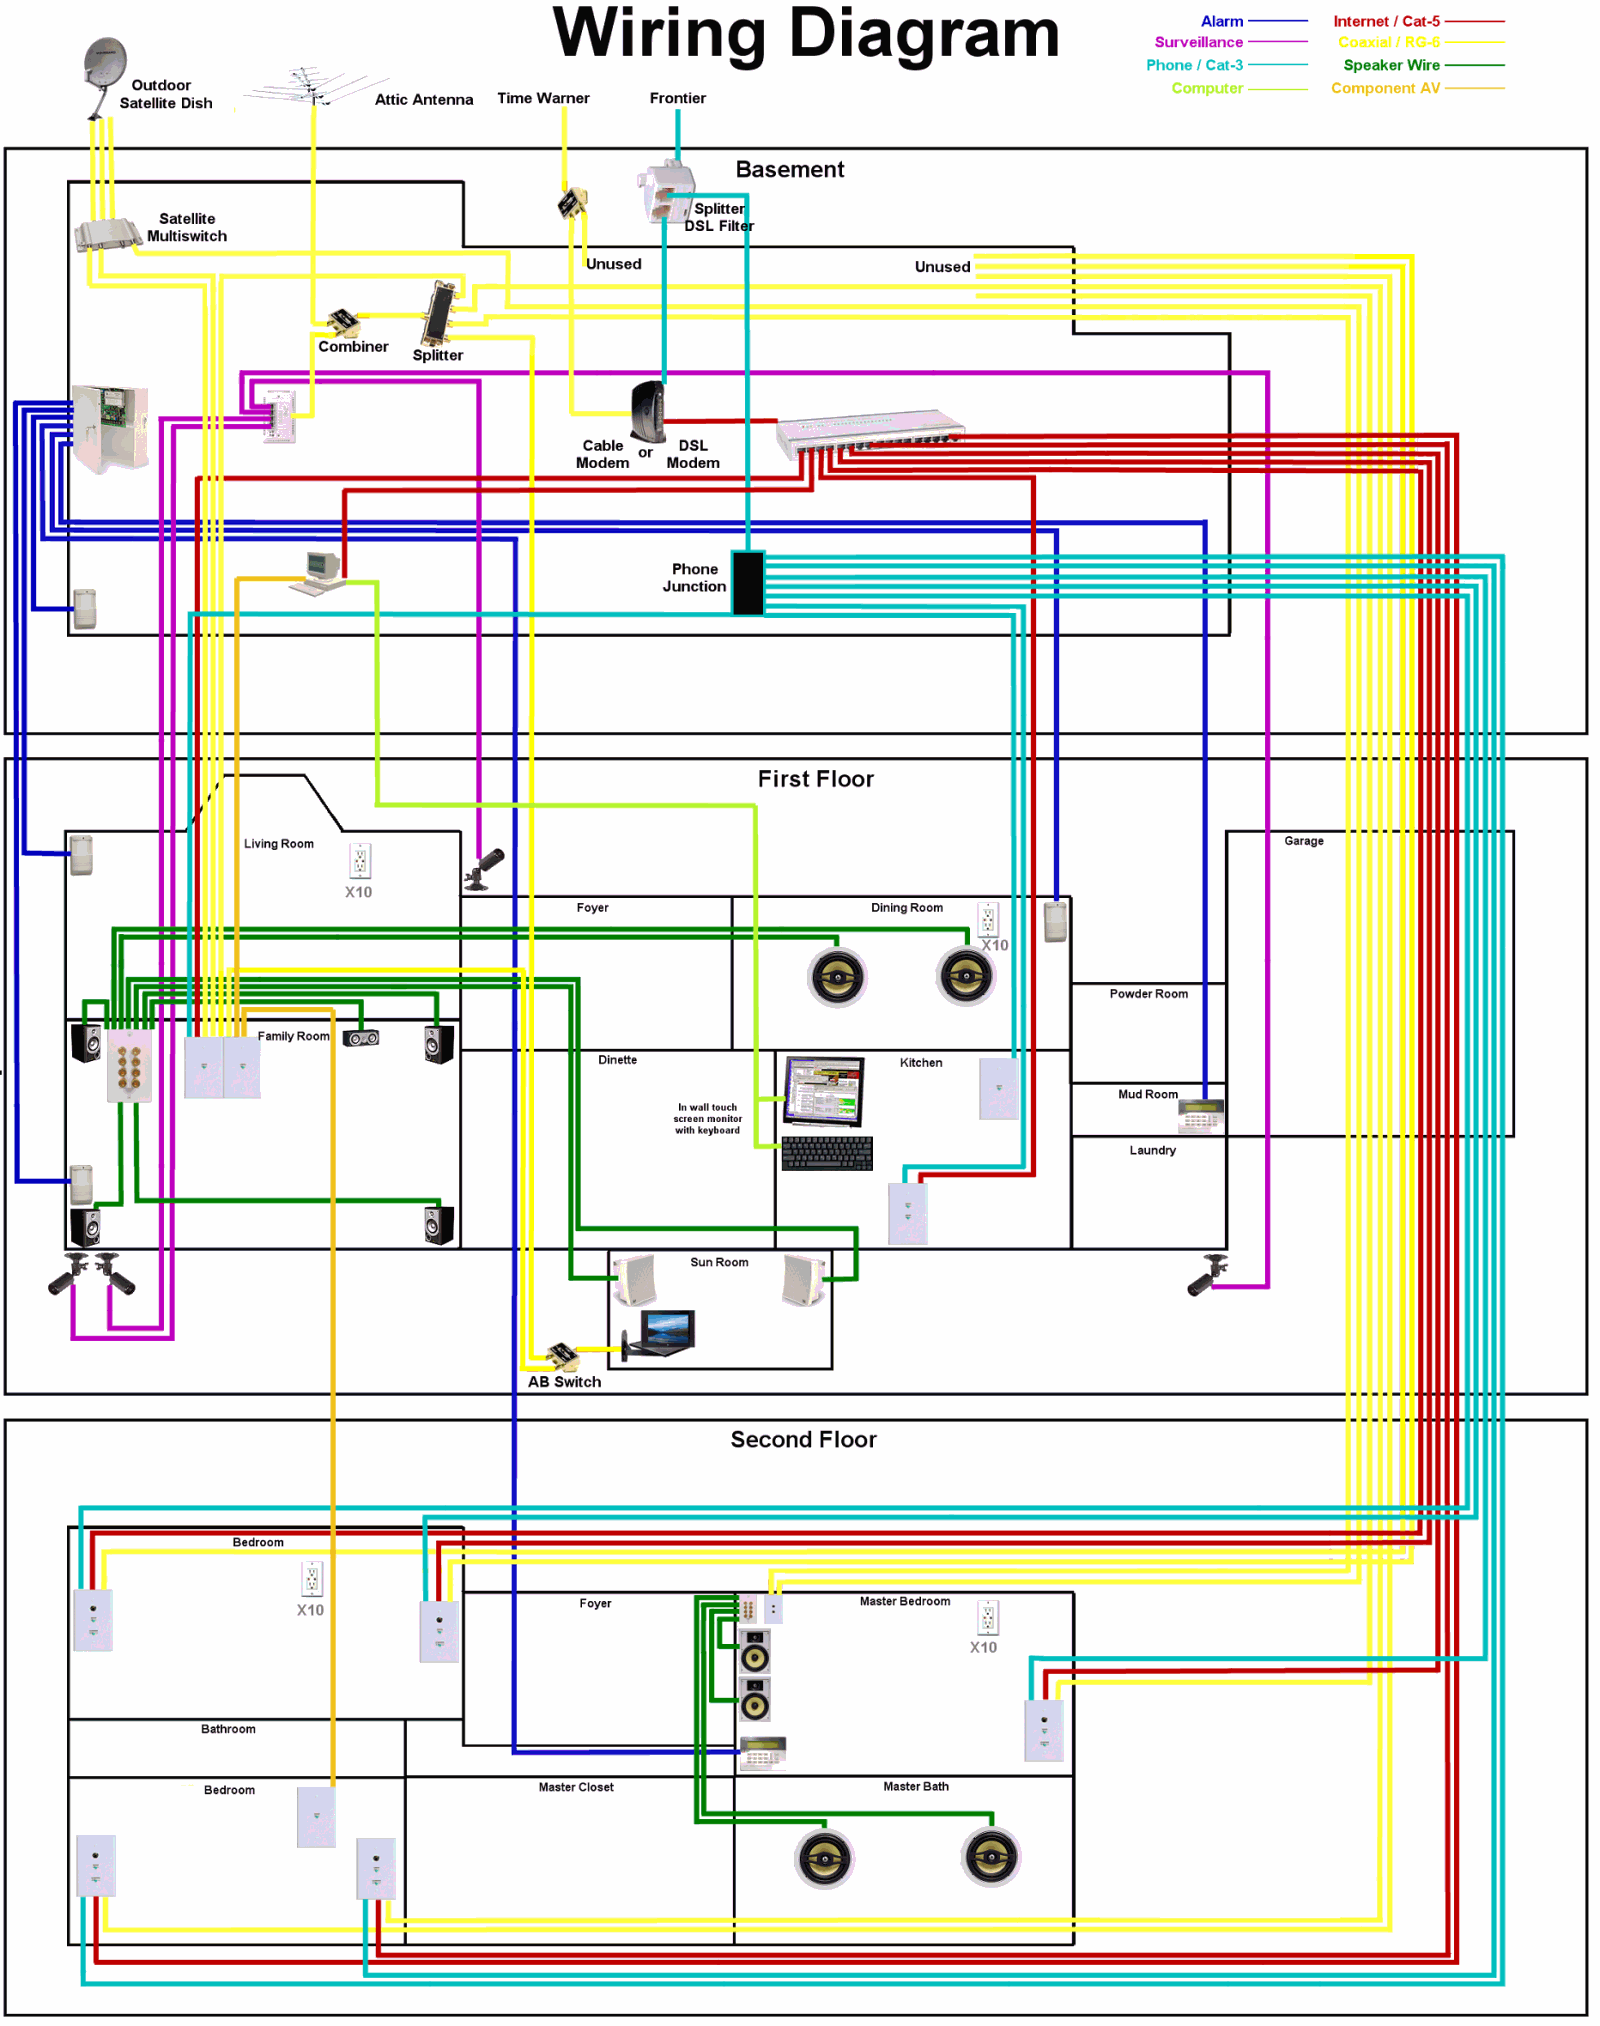 Electrical Wiring Plan For House - Wiring Diagrams